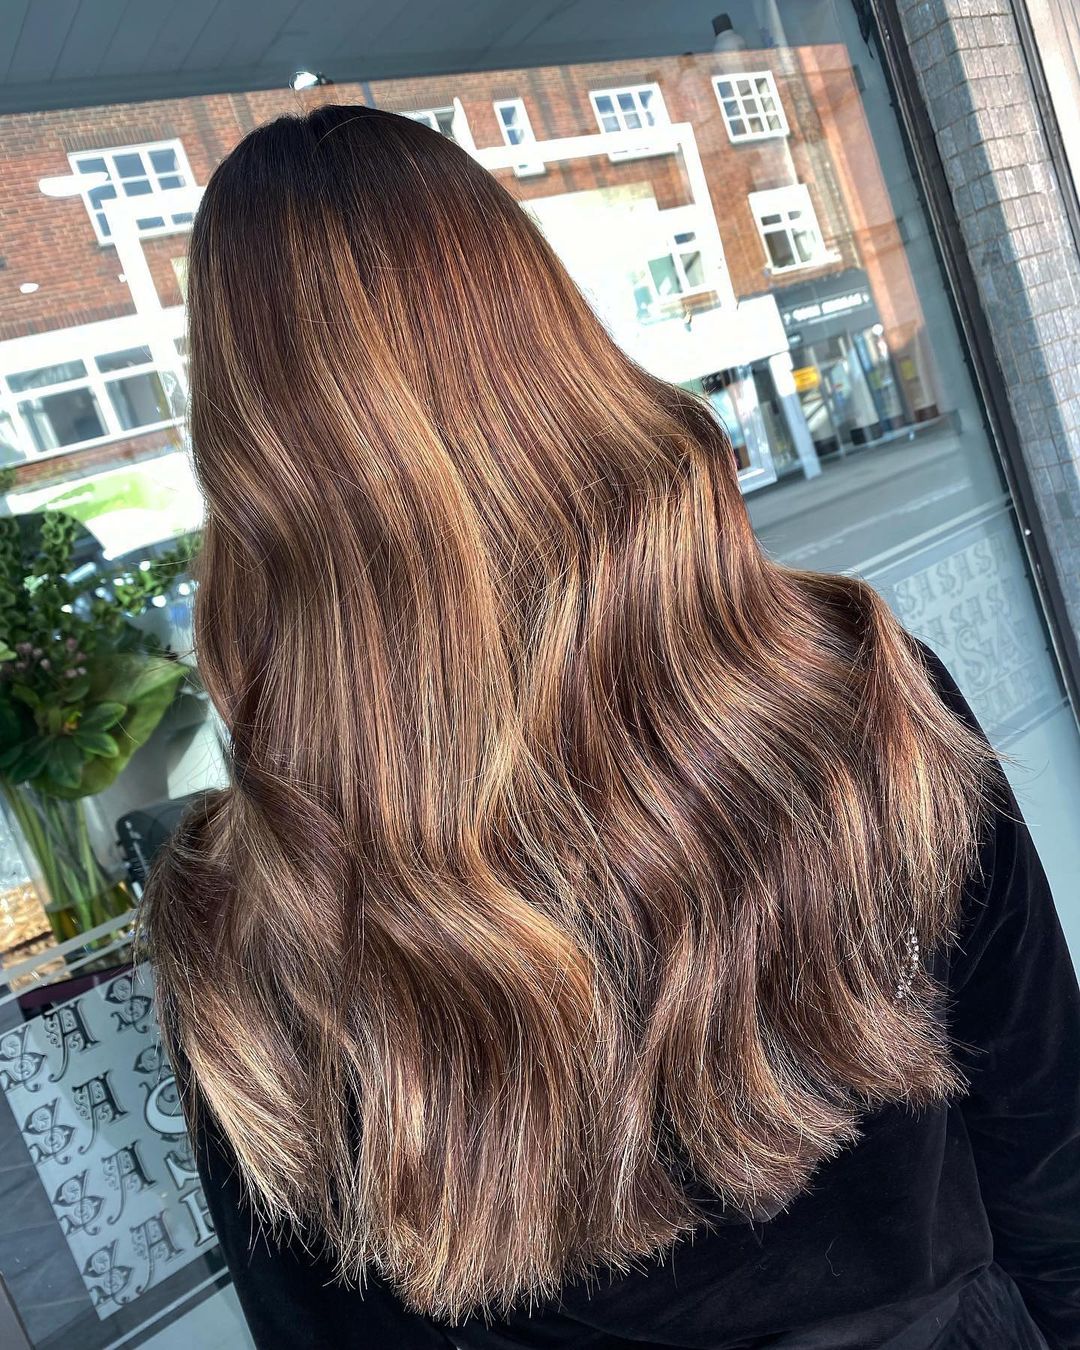 Three Balayage Blends You’re Going To Love